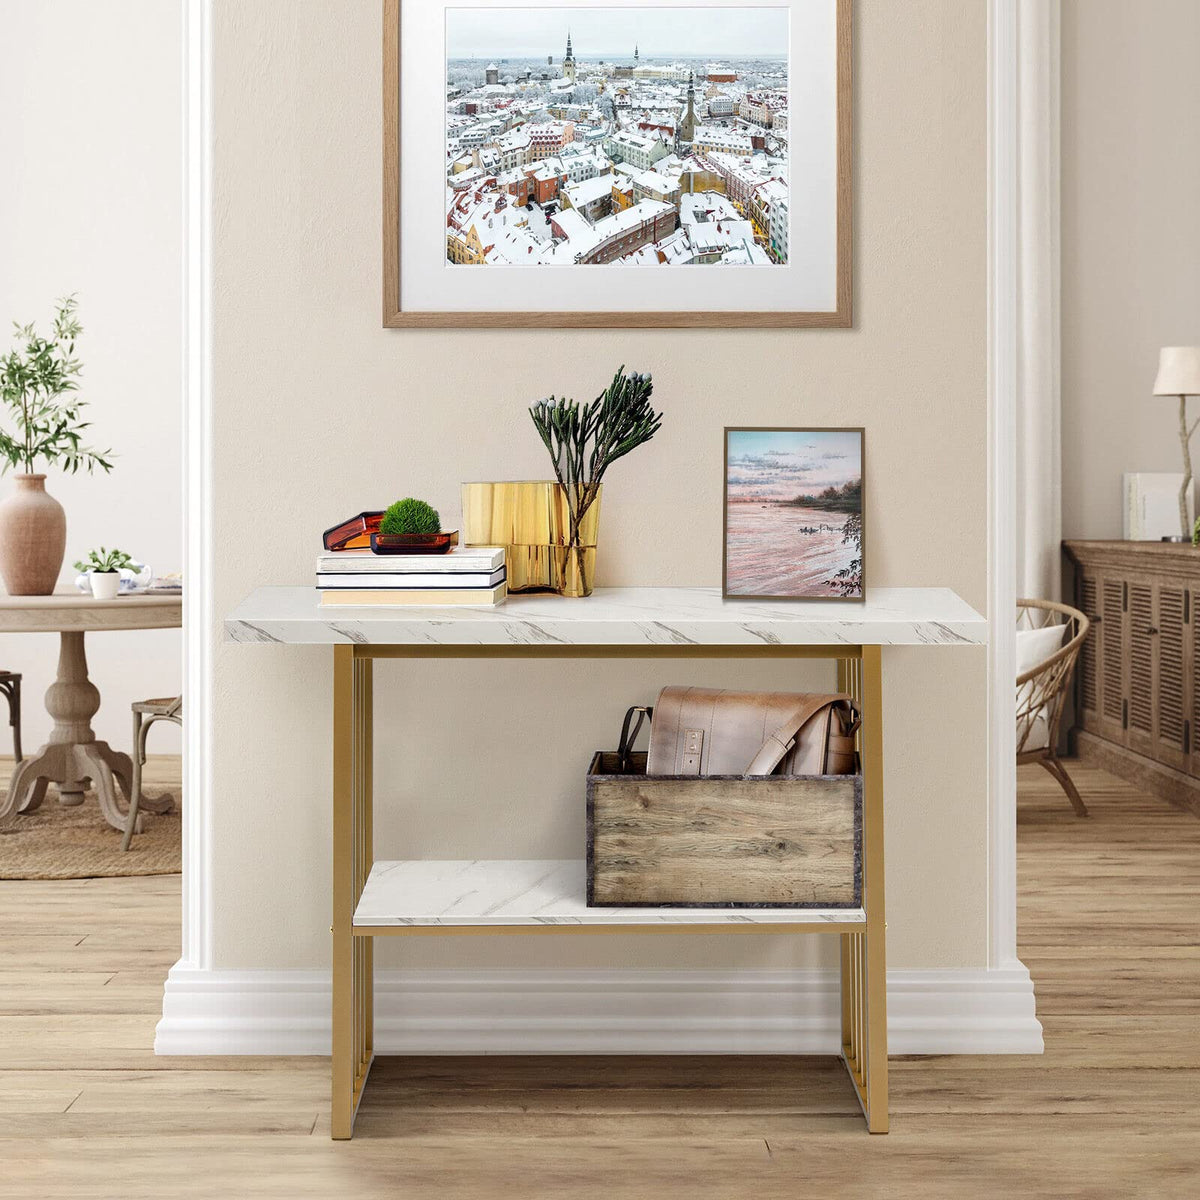 Giantex 2-Tier Console Table, White Faux Marble Sofa Table w/Open Shelf, Gold Steel Frame